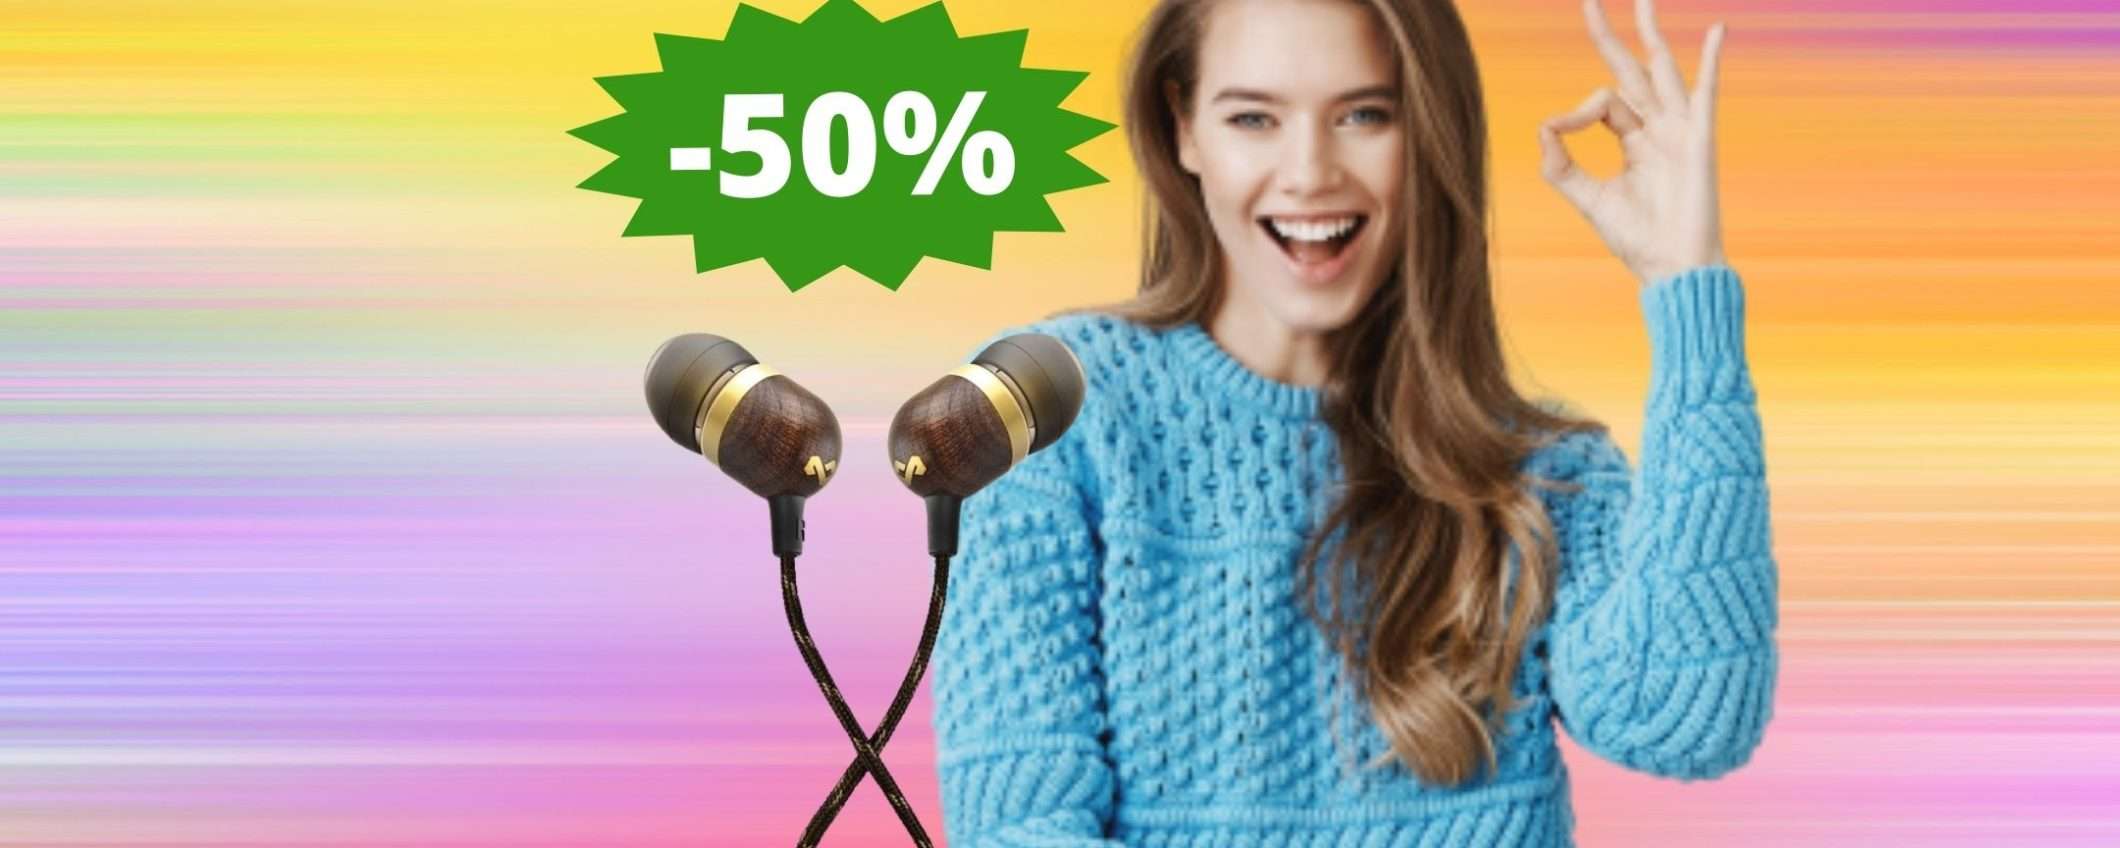 House of Marley Smile Jamaica: sconto FOLLE del 50%